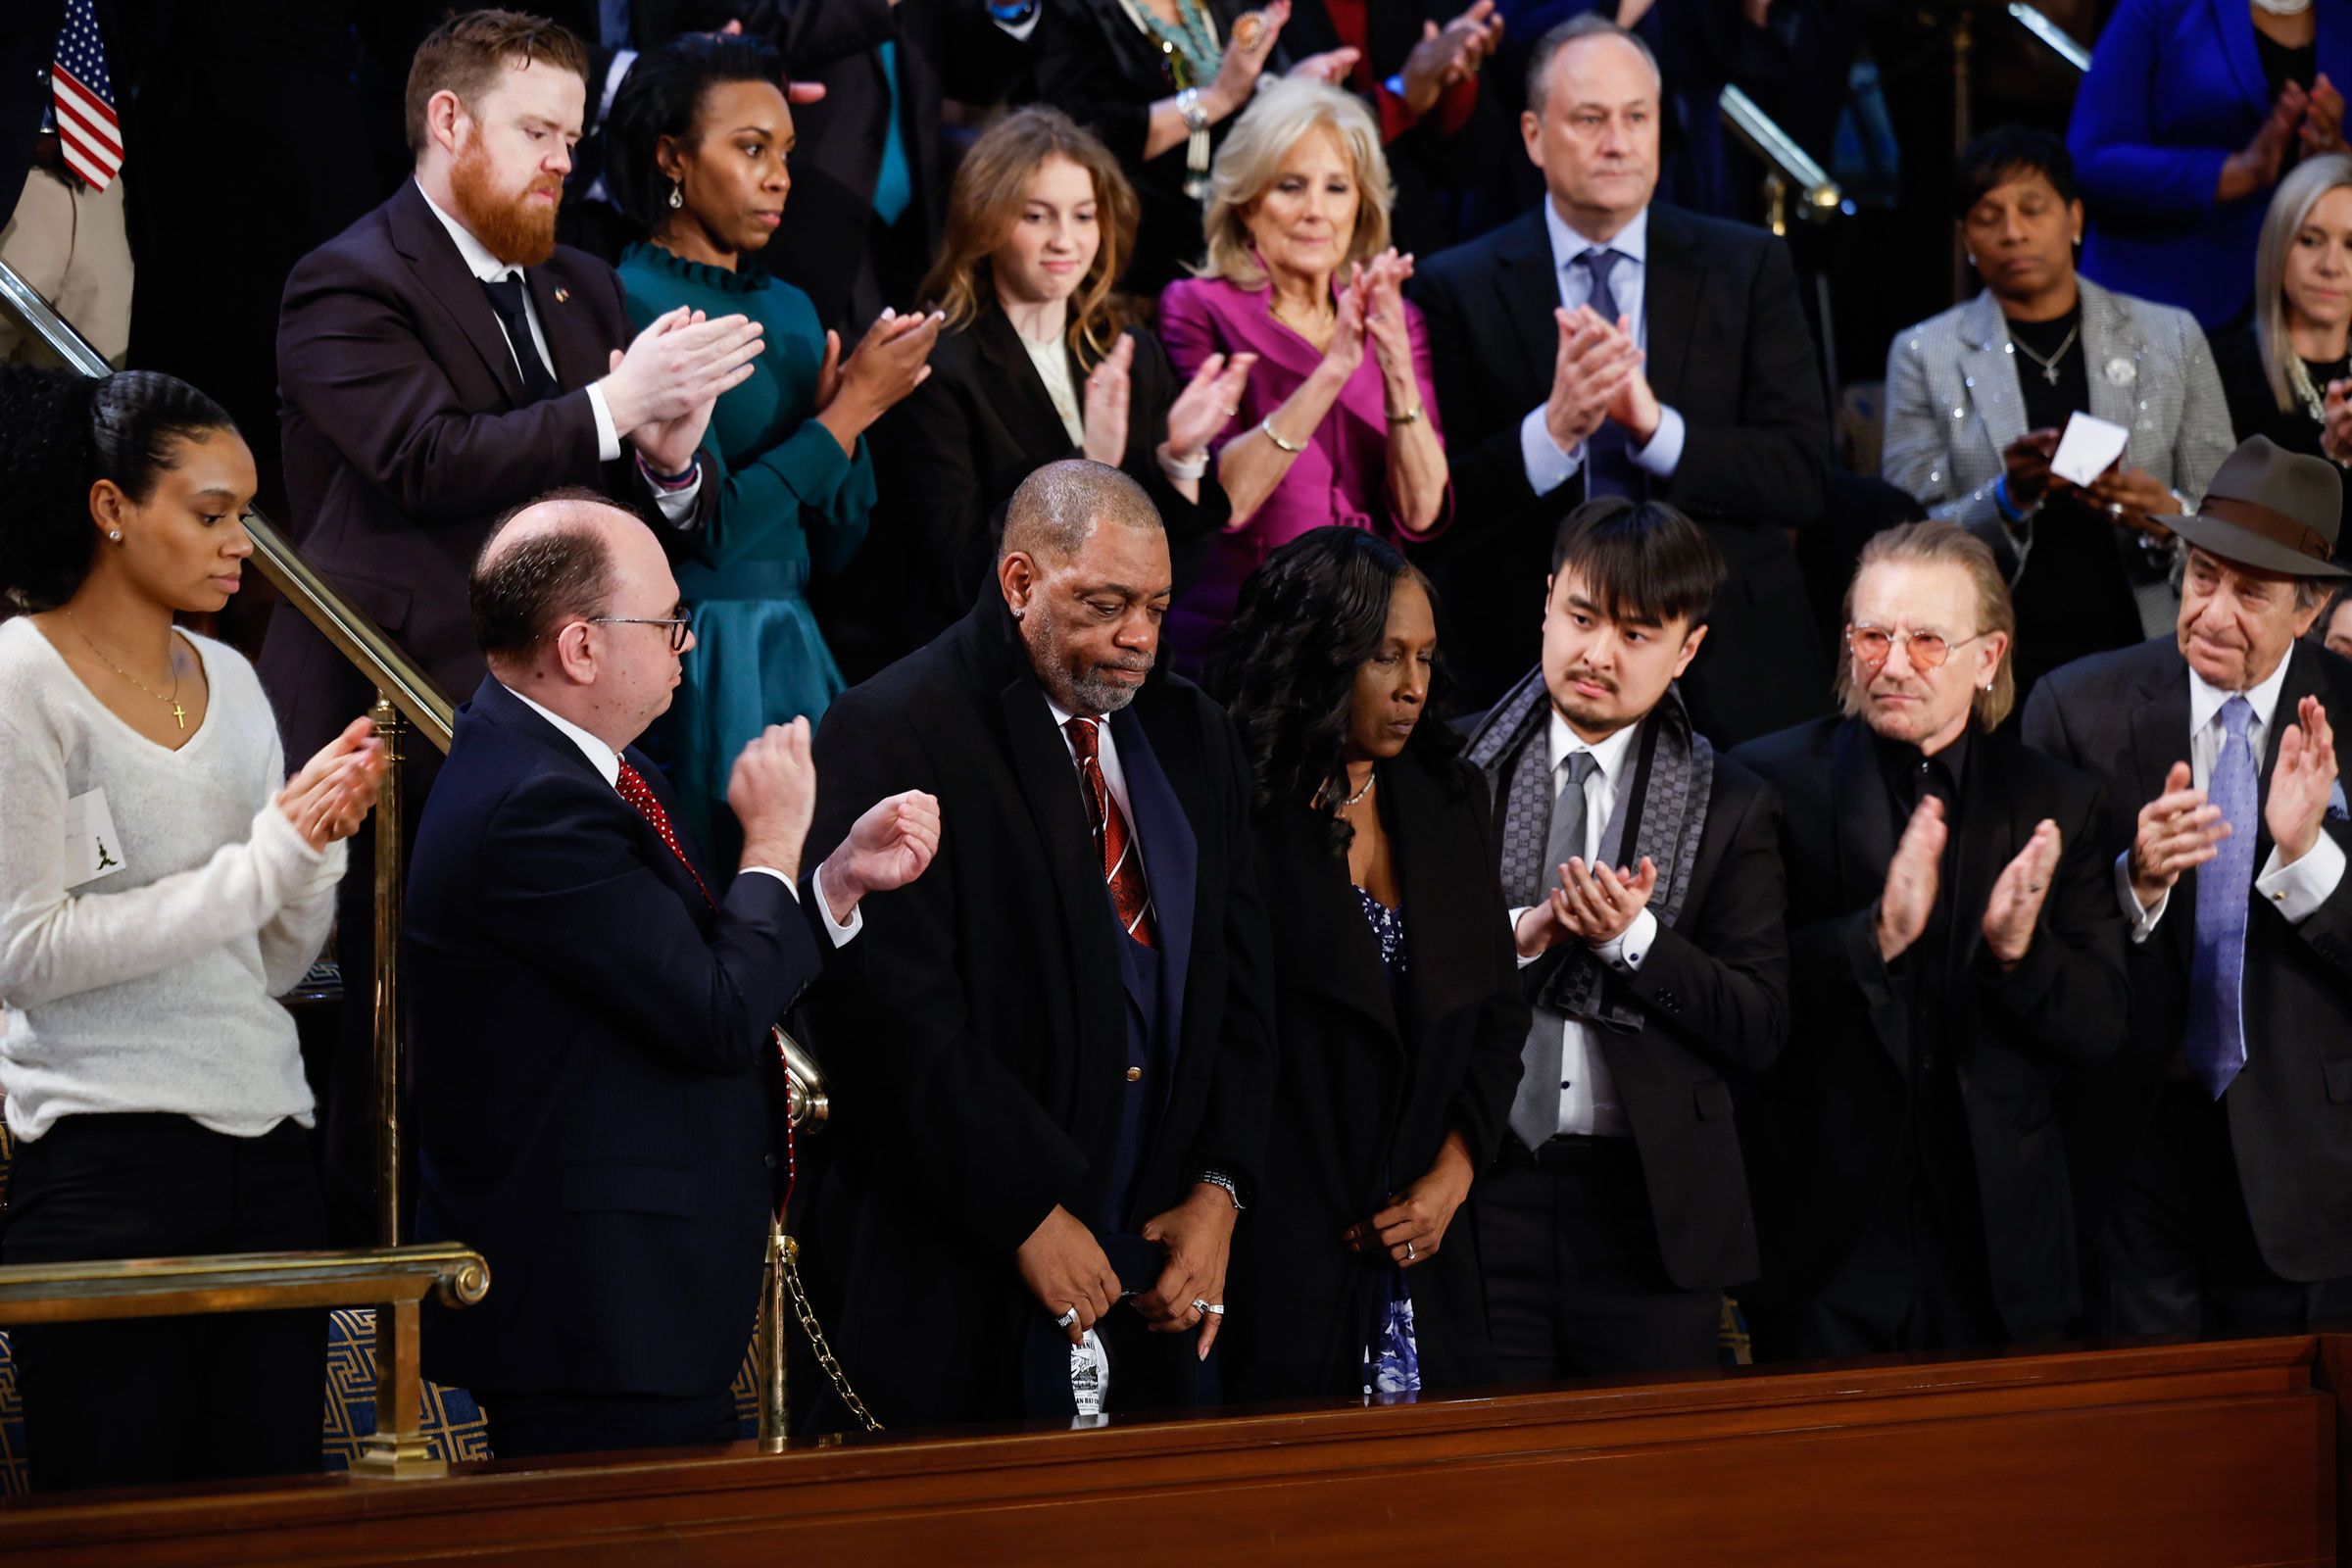 Rodney Wells and RowVaughn Wells, parents of Tyre Nichols, are applauded by Brandon Tsay, hero of the Monterey, Calif., shooting, Irish singer-songwriter Bono, and Paul Pelosi during President Joe Biden’s State of the Union address. (Chip Somodevilla—Getty Images)